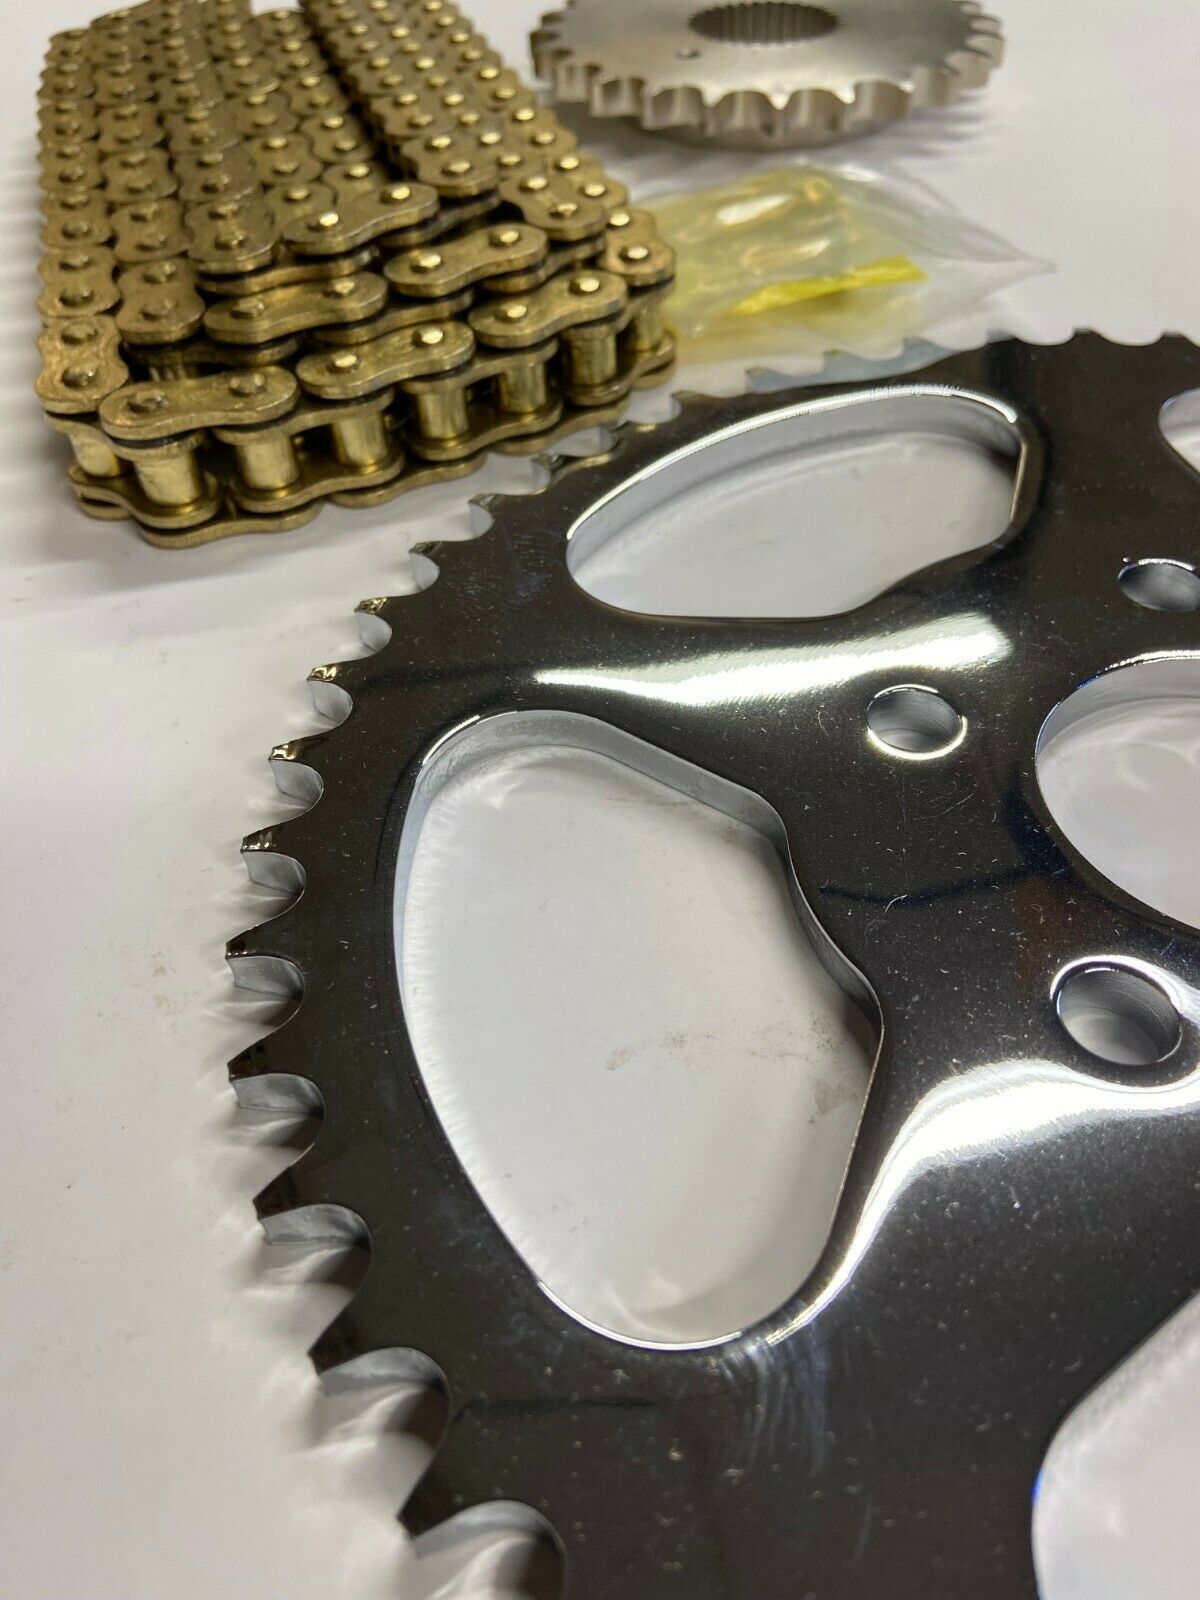 Gold Chain Drive Sprocket Conversion Kit For 5 Speed Harley Softail  1986-1999